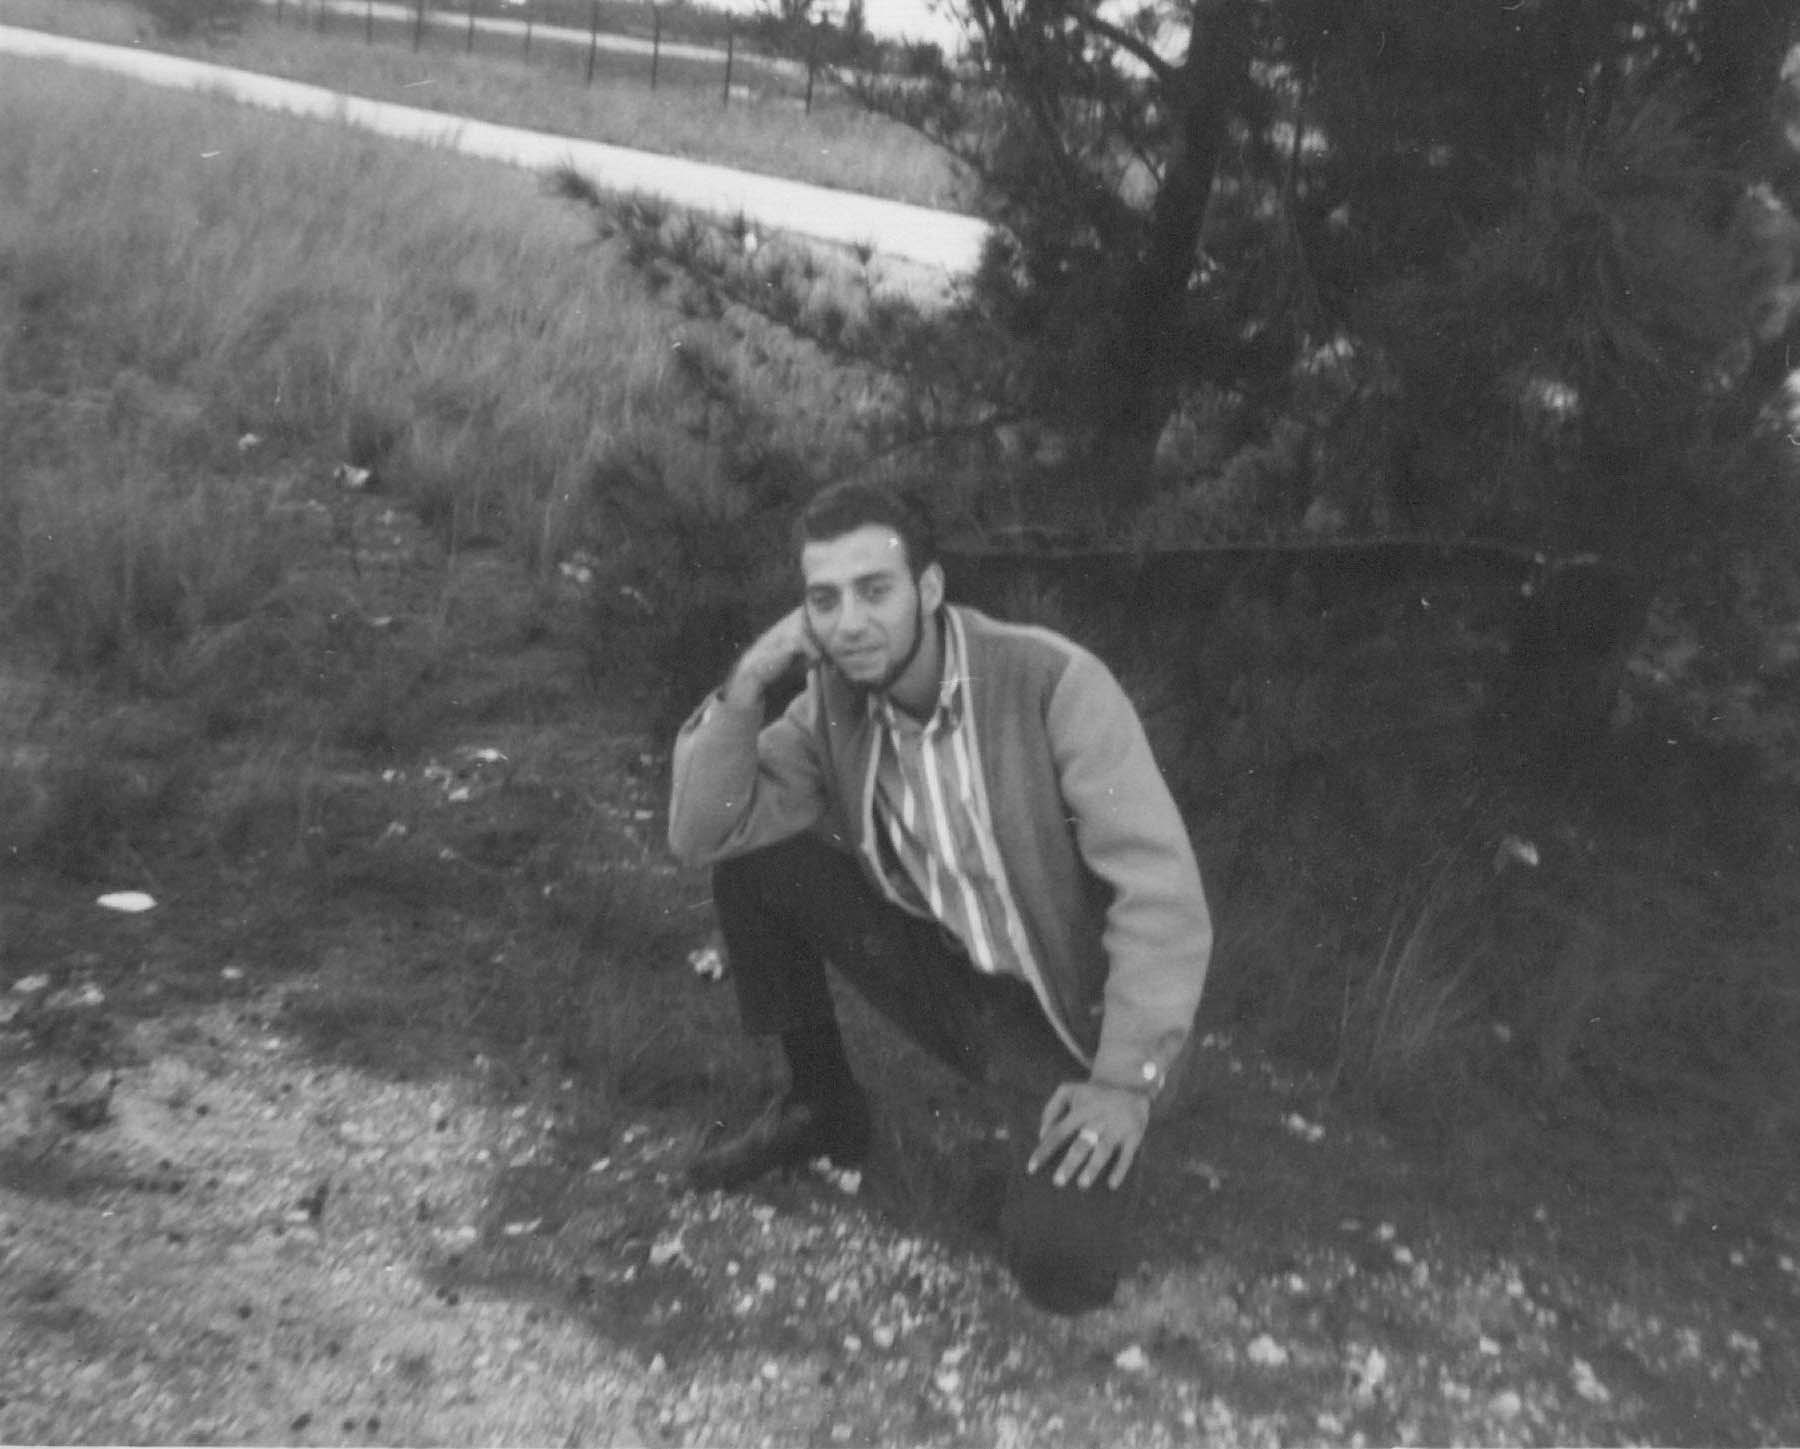 Black and white photo of a young man, Les Haber, kneeling in the grass by the road in 1964.